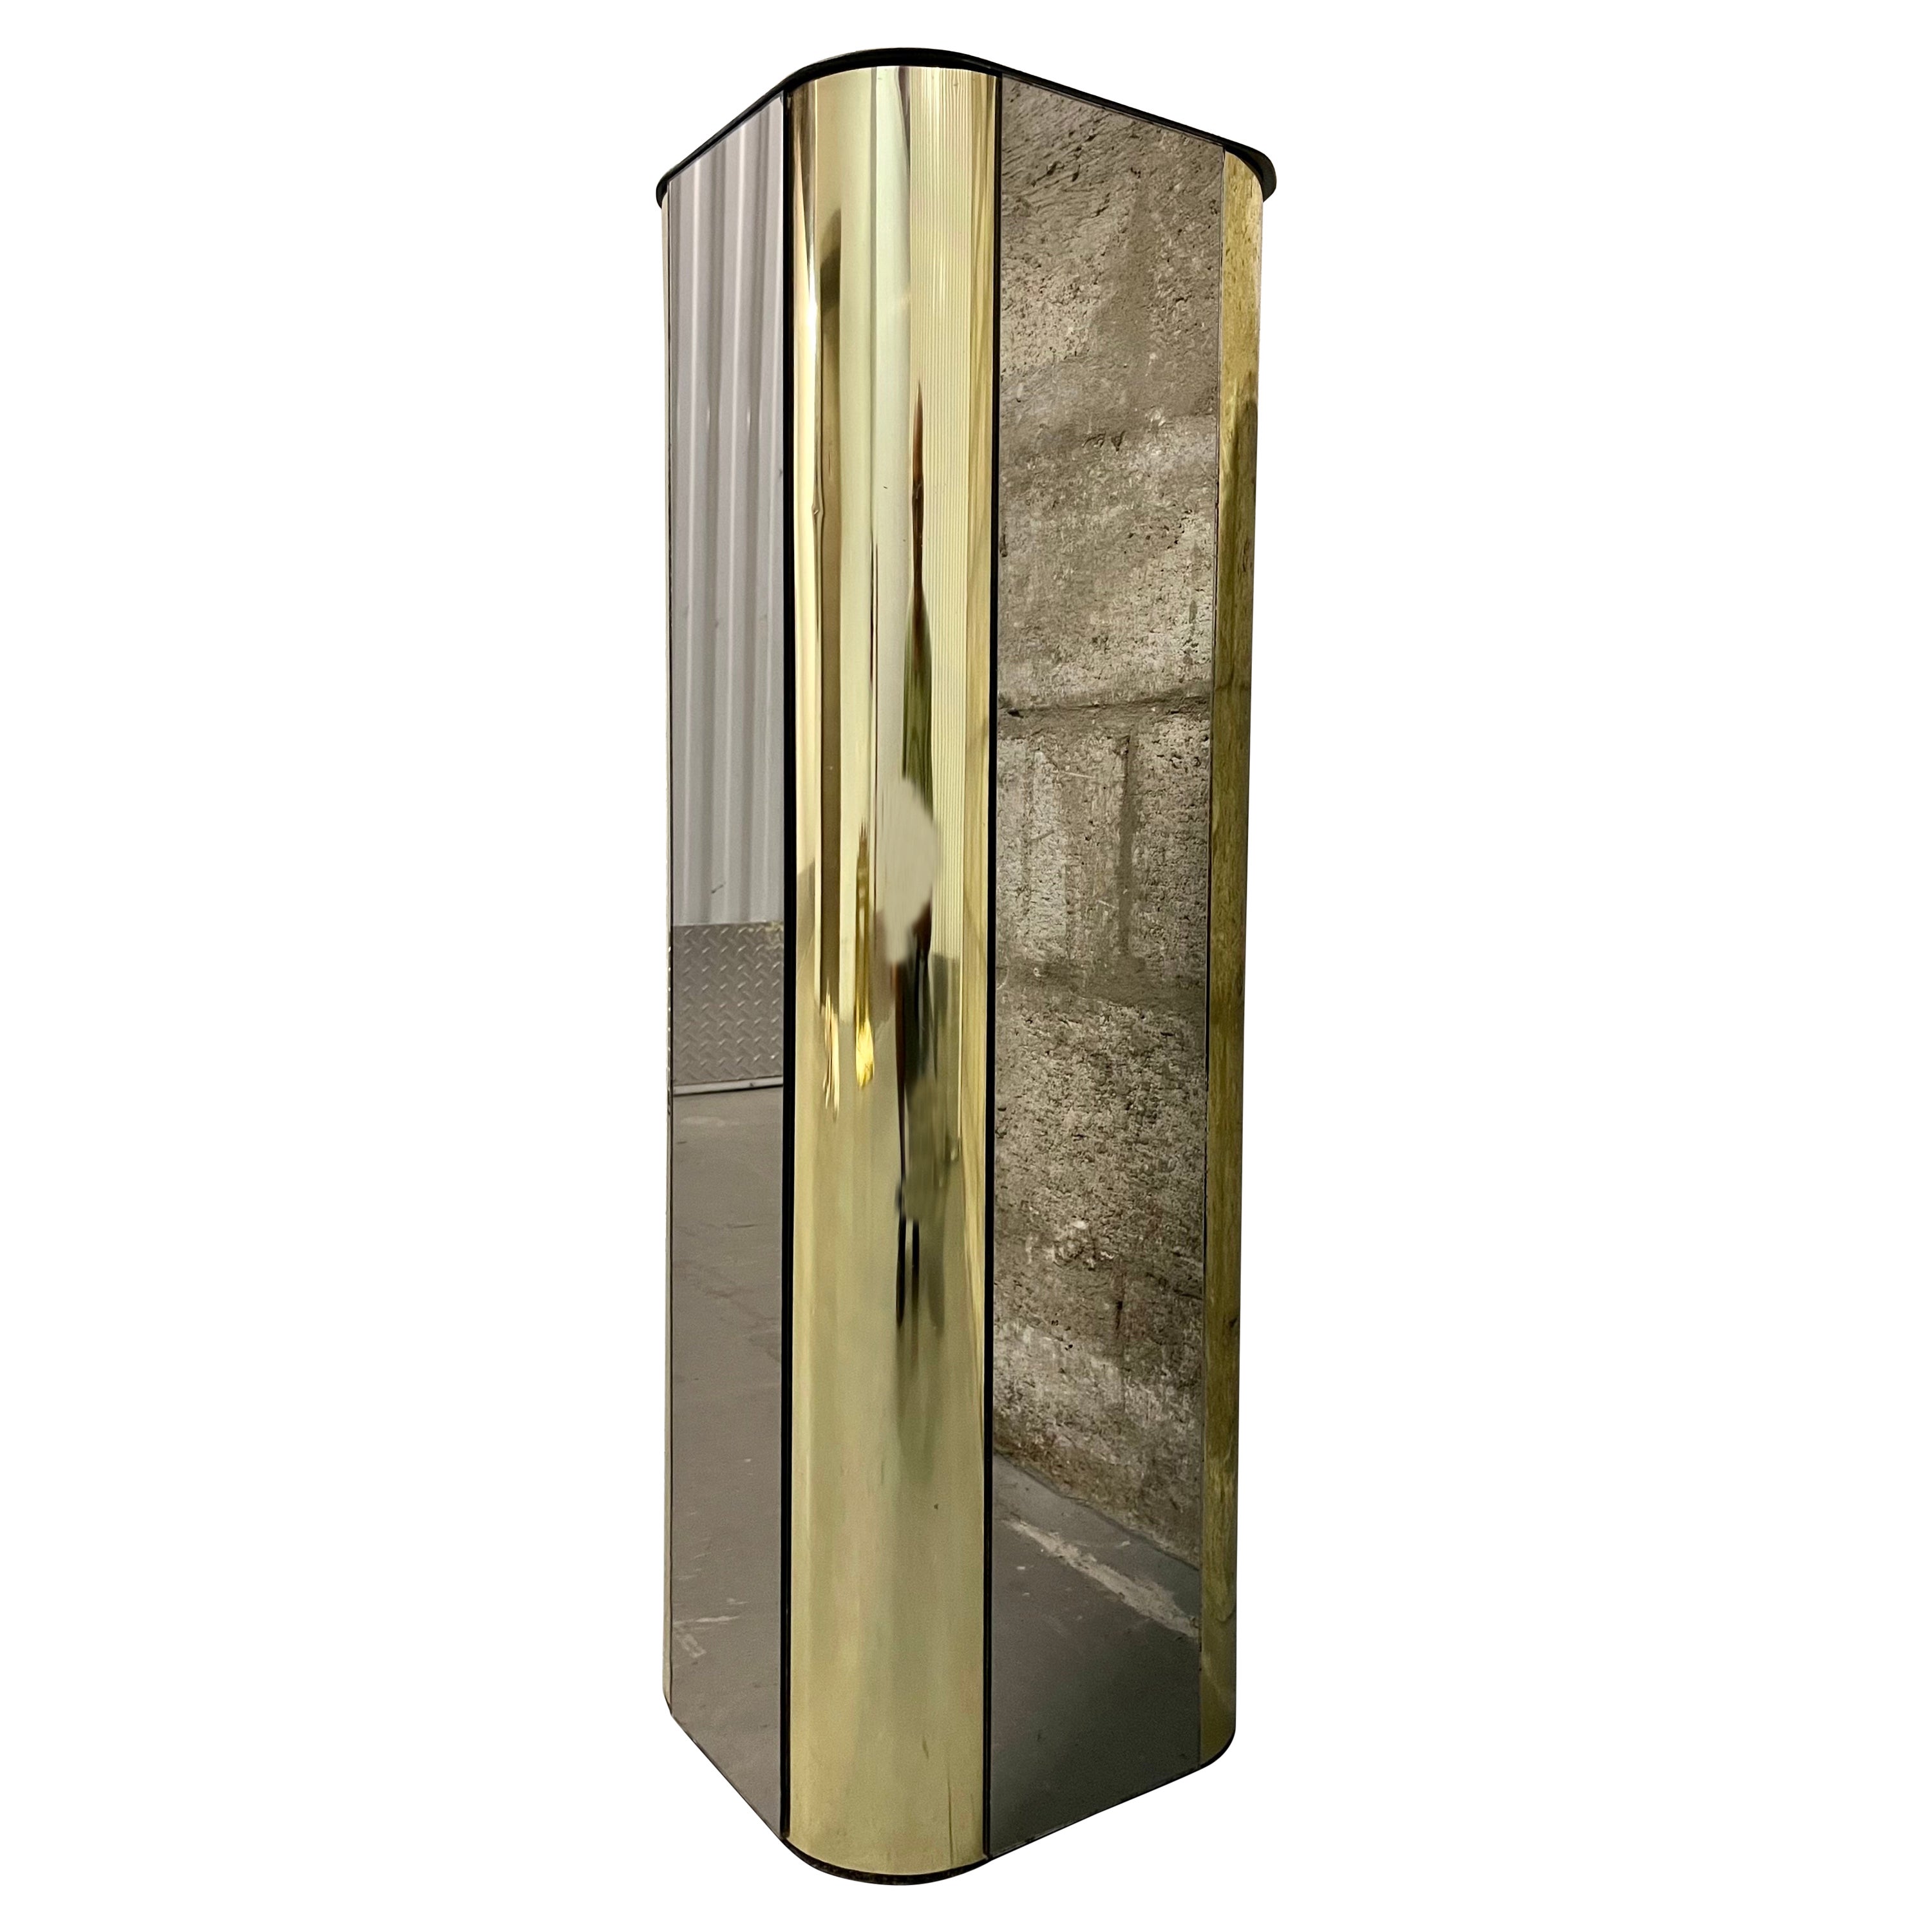 Hollywood Regency Brass and Smoked Mirror Pedestal in the Curtis Jere's Style.